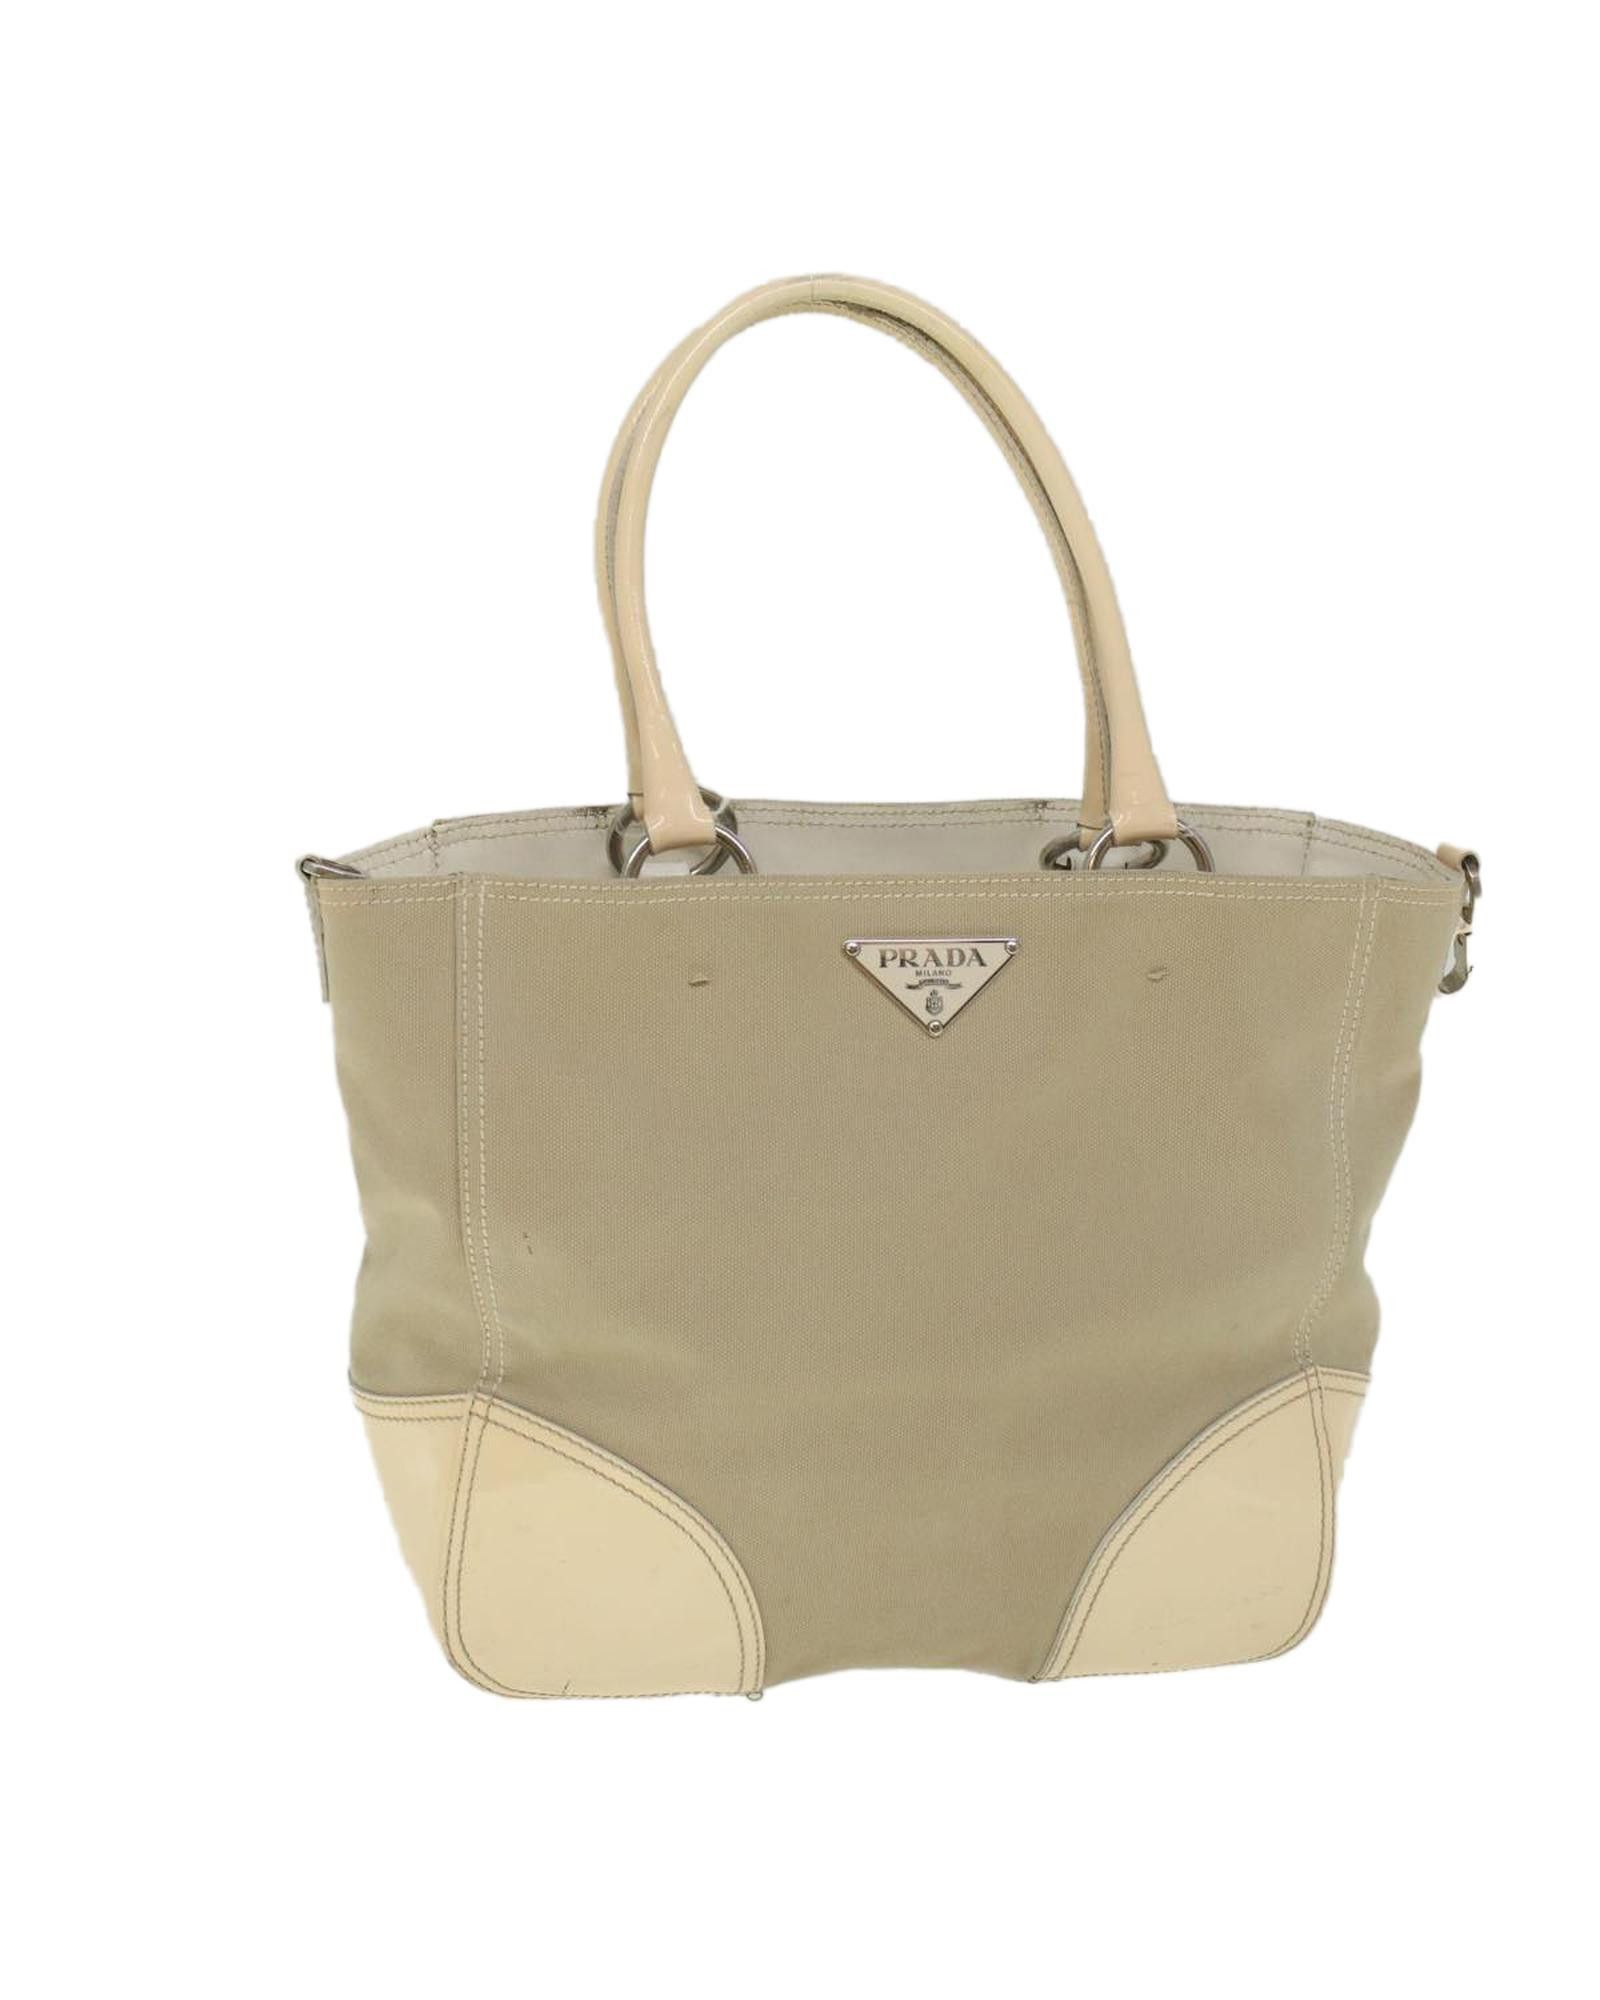 Prada Beige Canvas Tote Bag Size ONE SIZE - 1 Preview